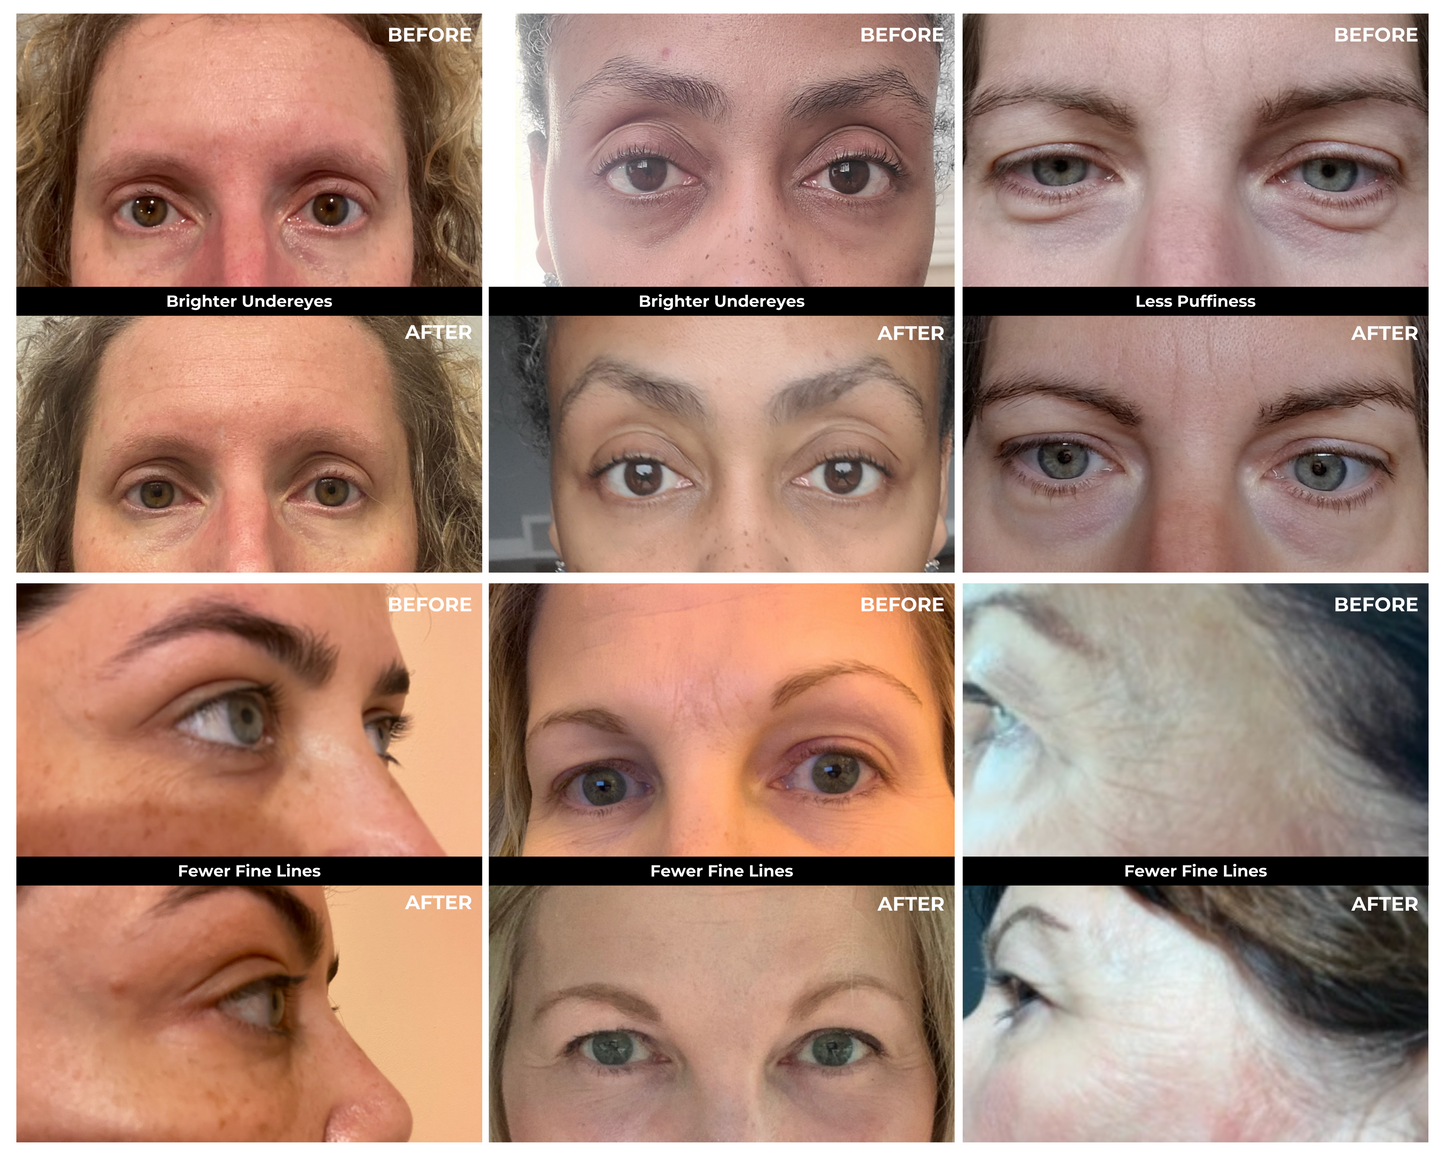 6 sets of before & after pics from eye mask trial participants